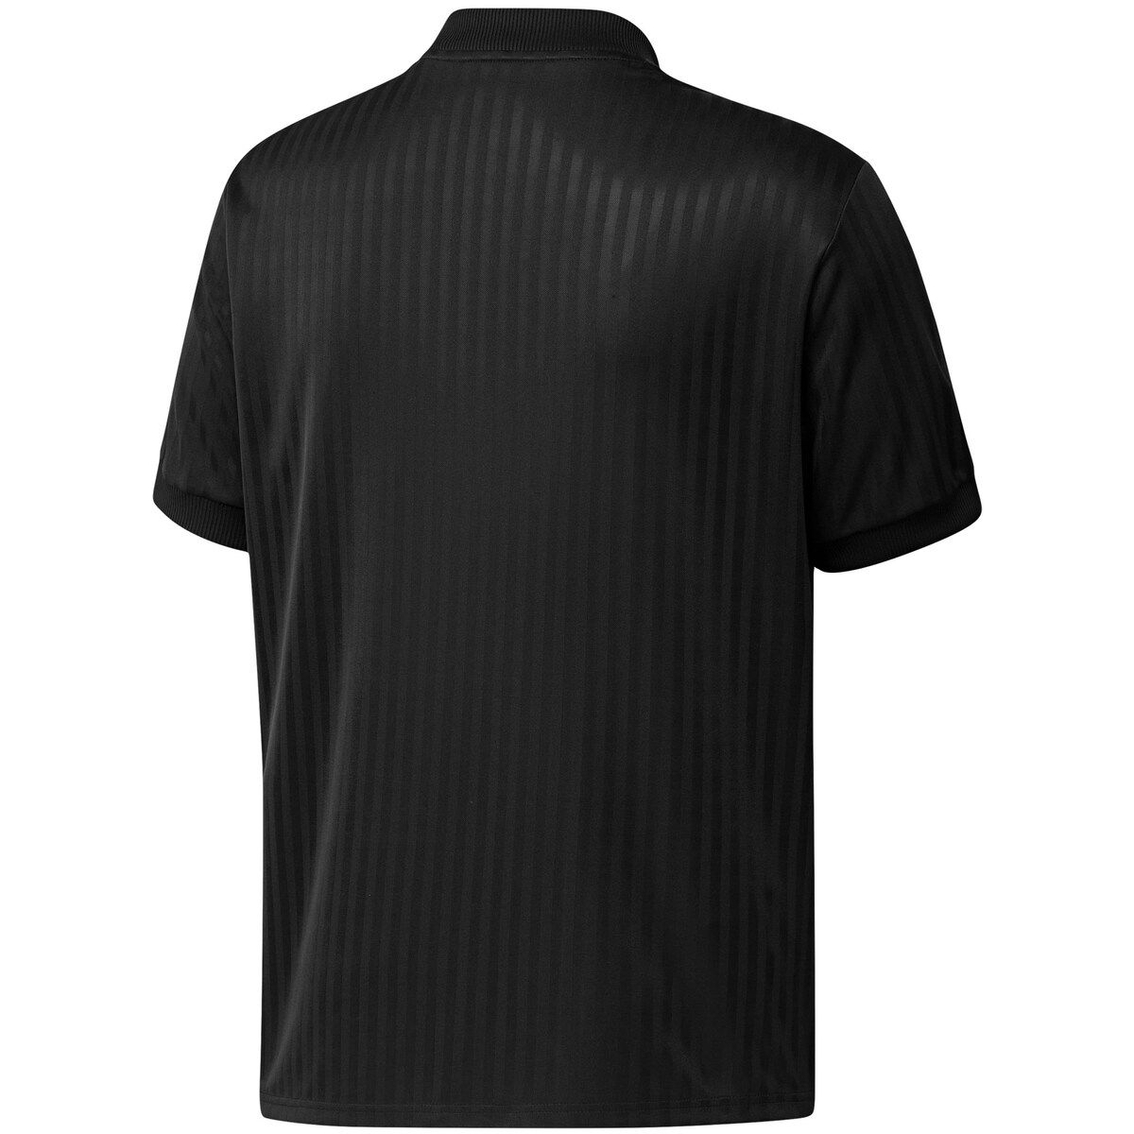 adidas Men's Black Manchester United Football Icon Jersey - Image 4 of 4